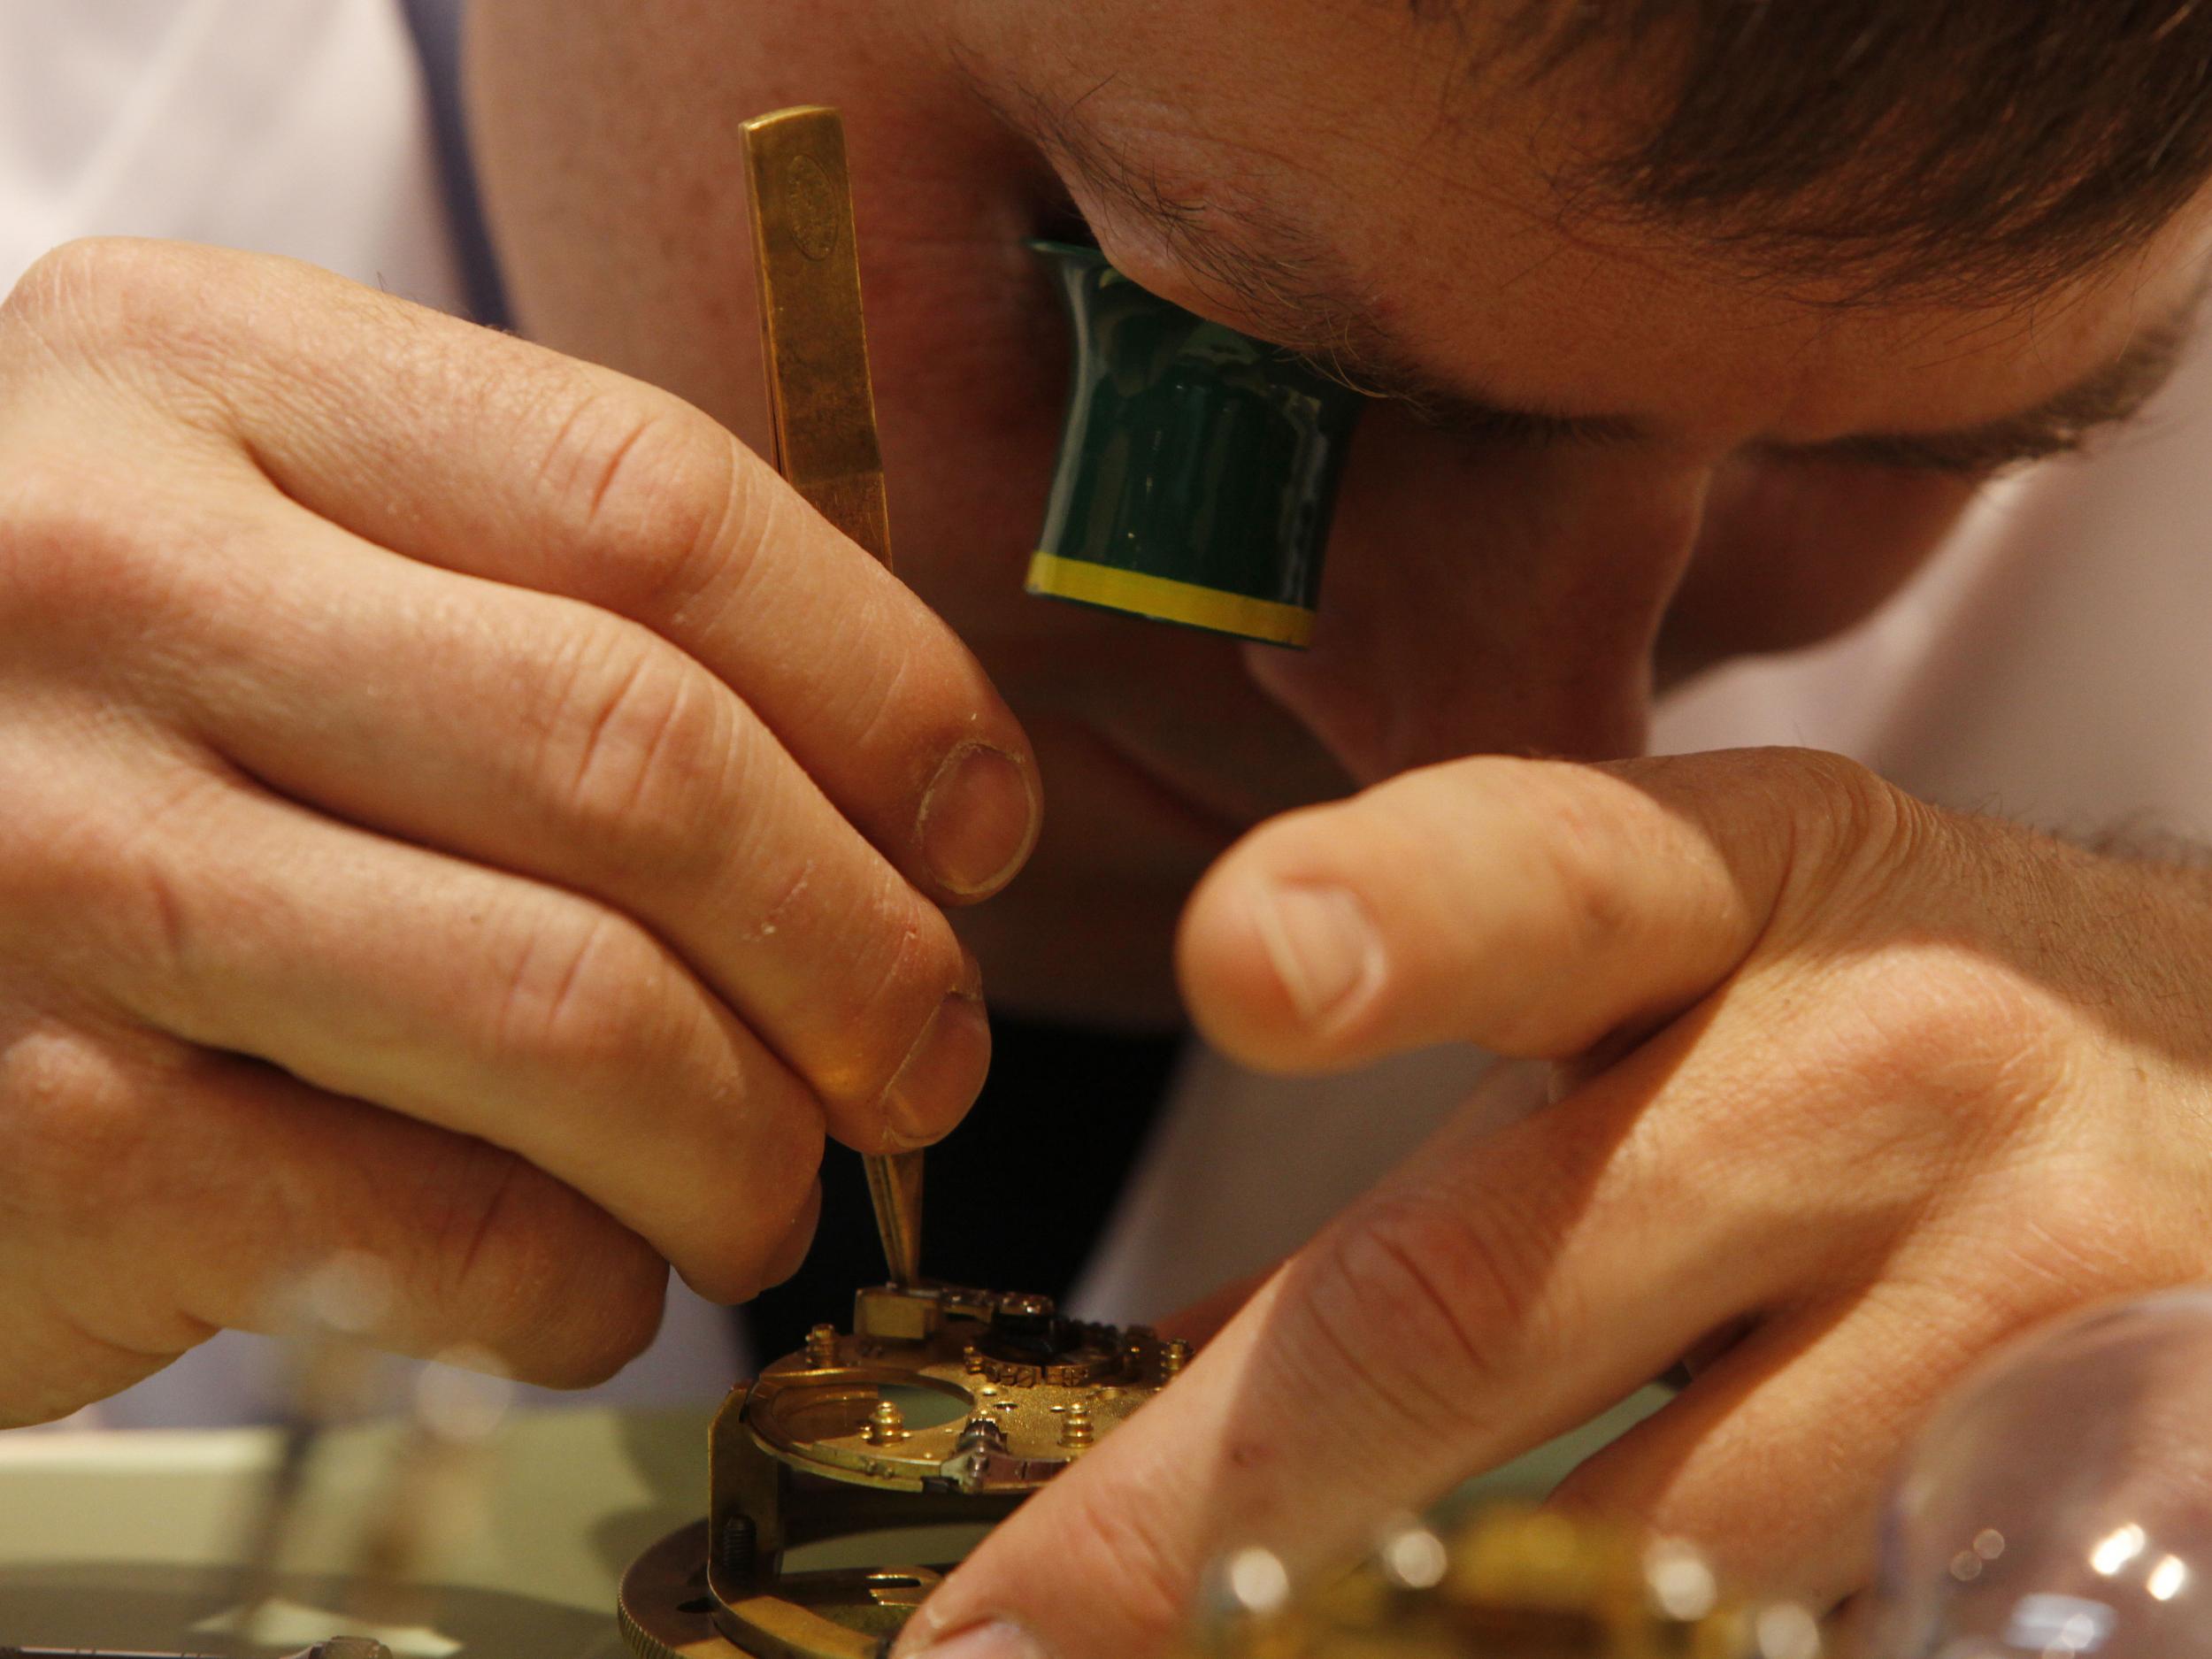 A watchmaker works on a watch mechanism at the Baselworld trade show in Basel, Switzerland